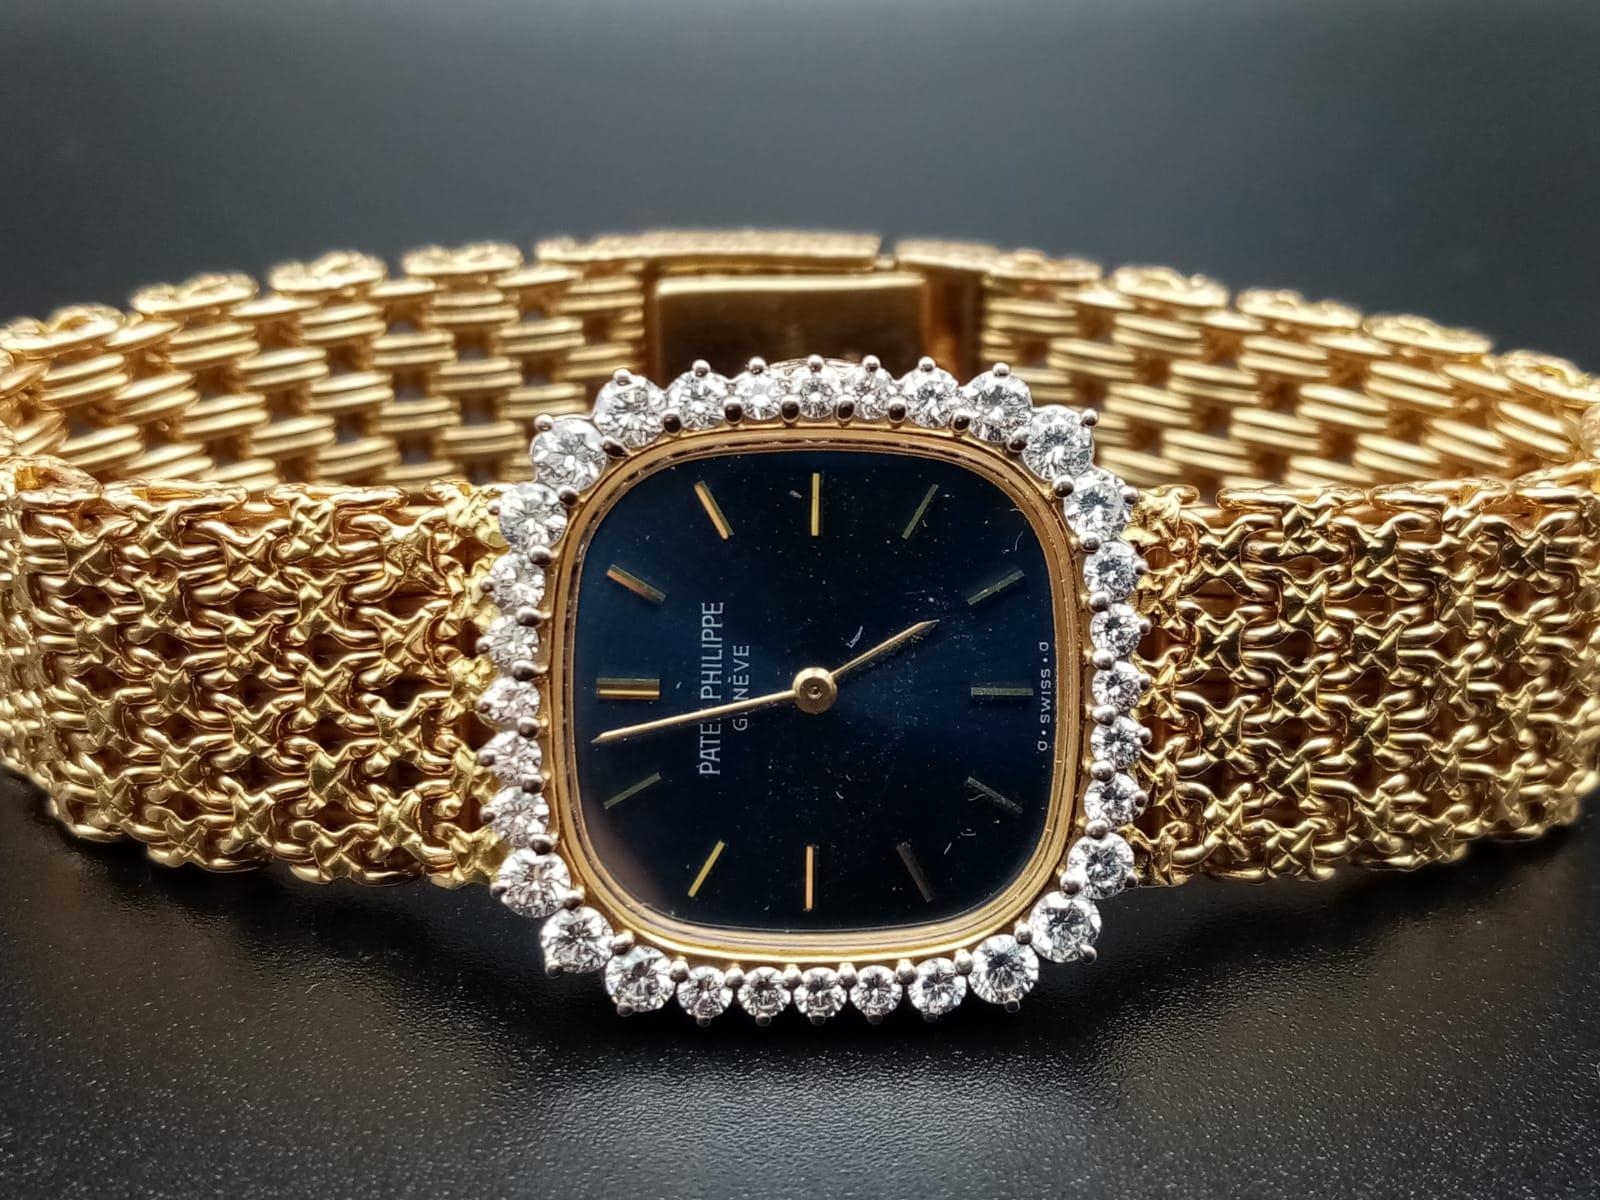 A Patek Phillipe Classic 18K Gold and Diamond Ladies Watch. Woven gold bracelet. Gold case - 24mm. - Image 4 of 11